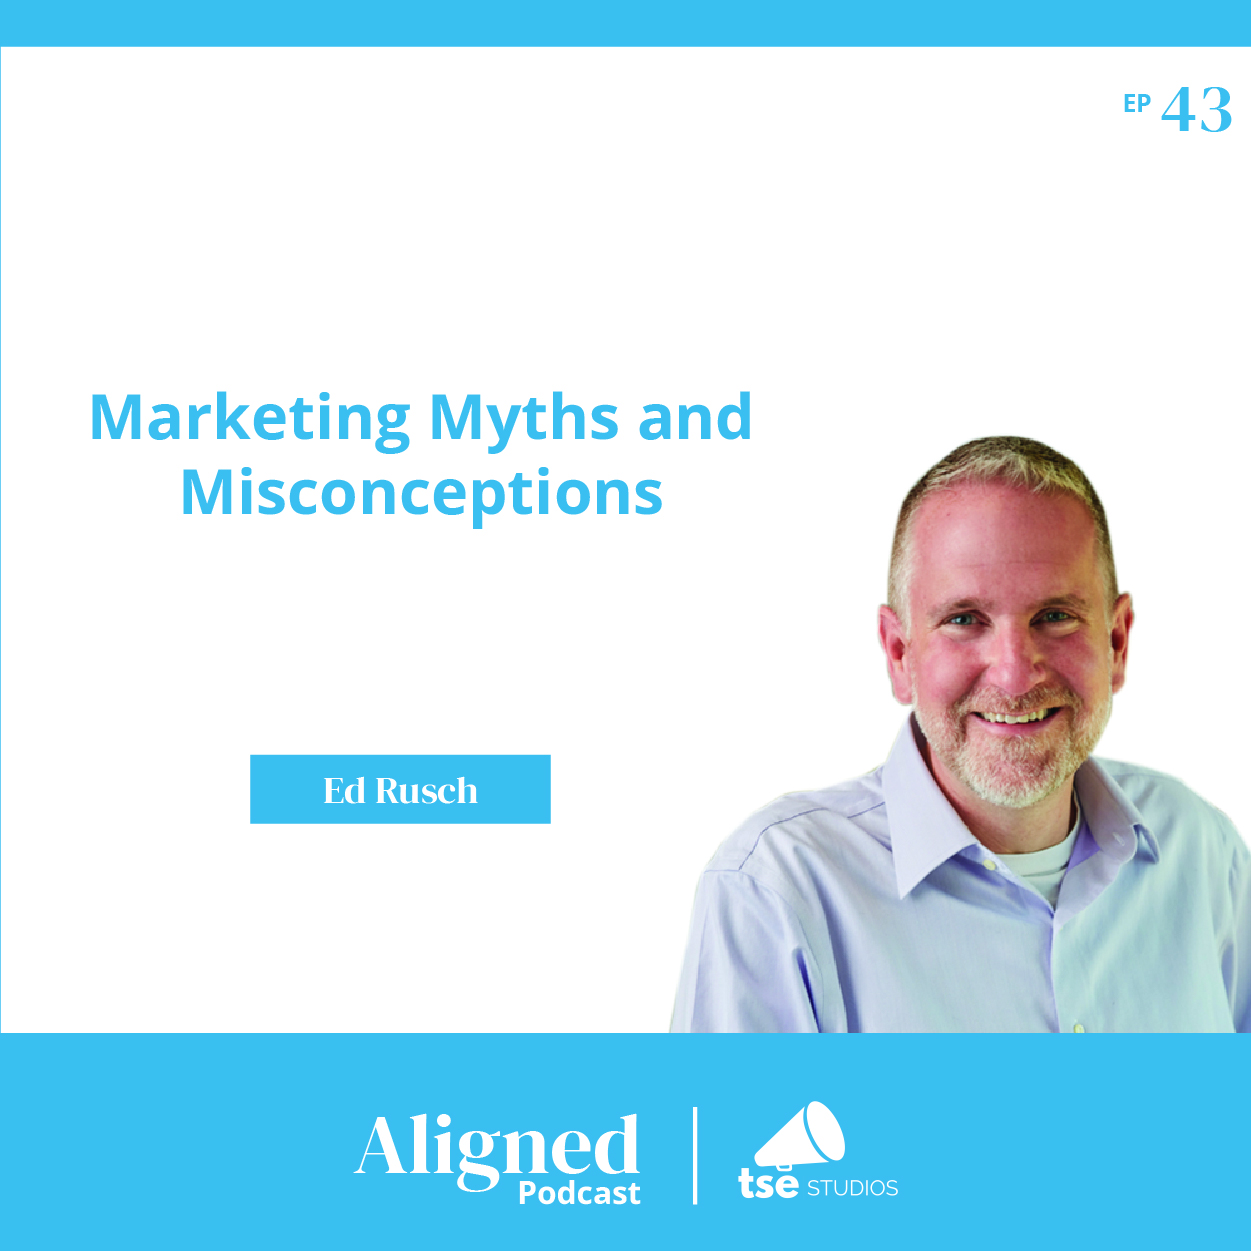 Marketing Myths and Misconceptions